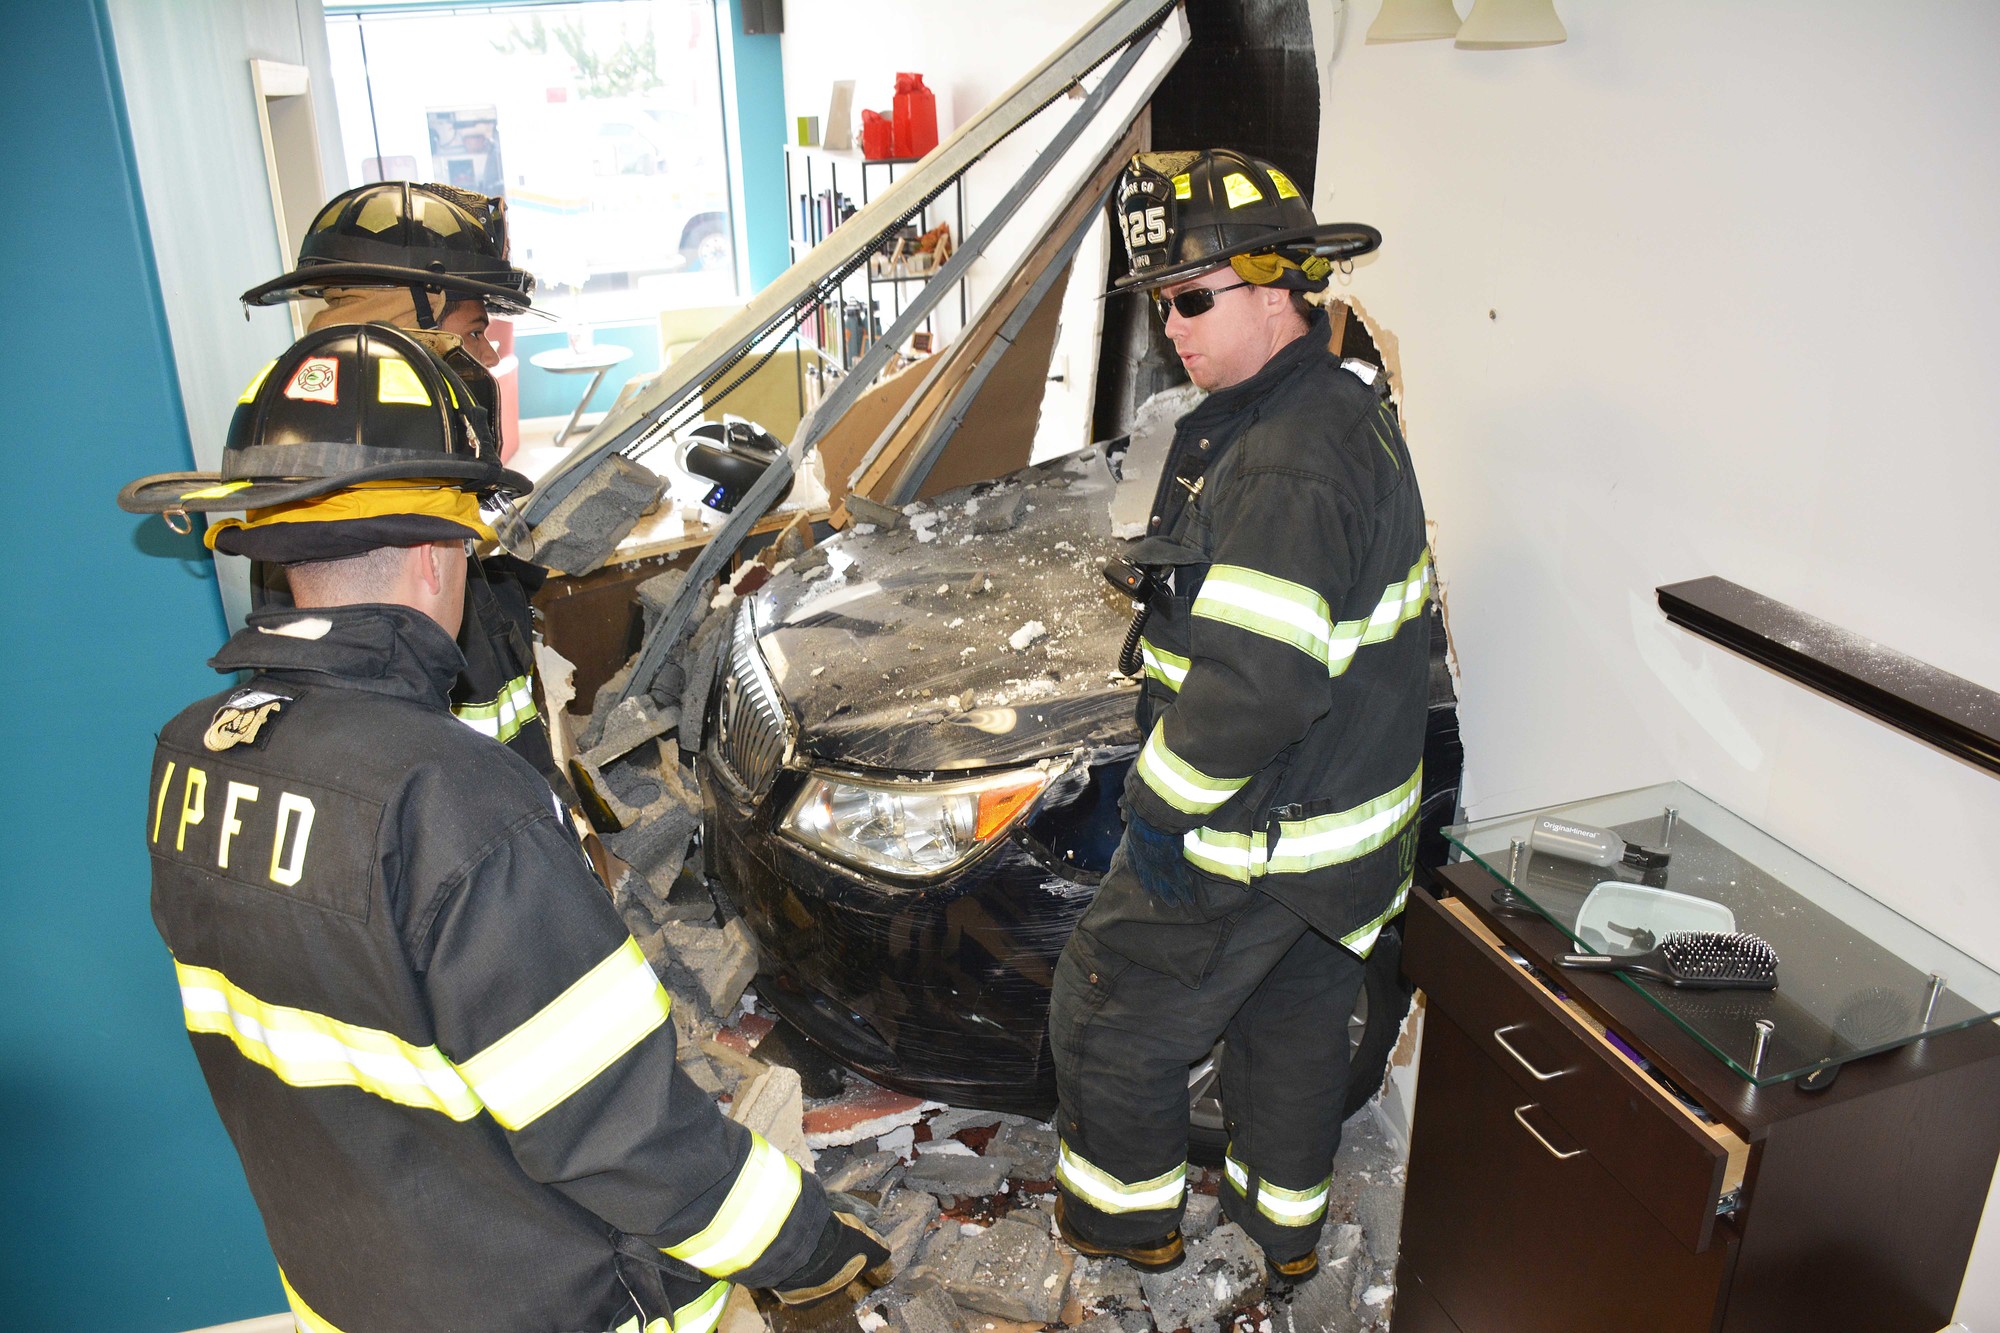 Island Park FD responded to a car driven into the side of the Vivo Salon in Island Park.